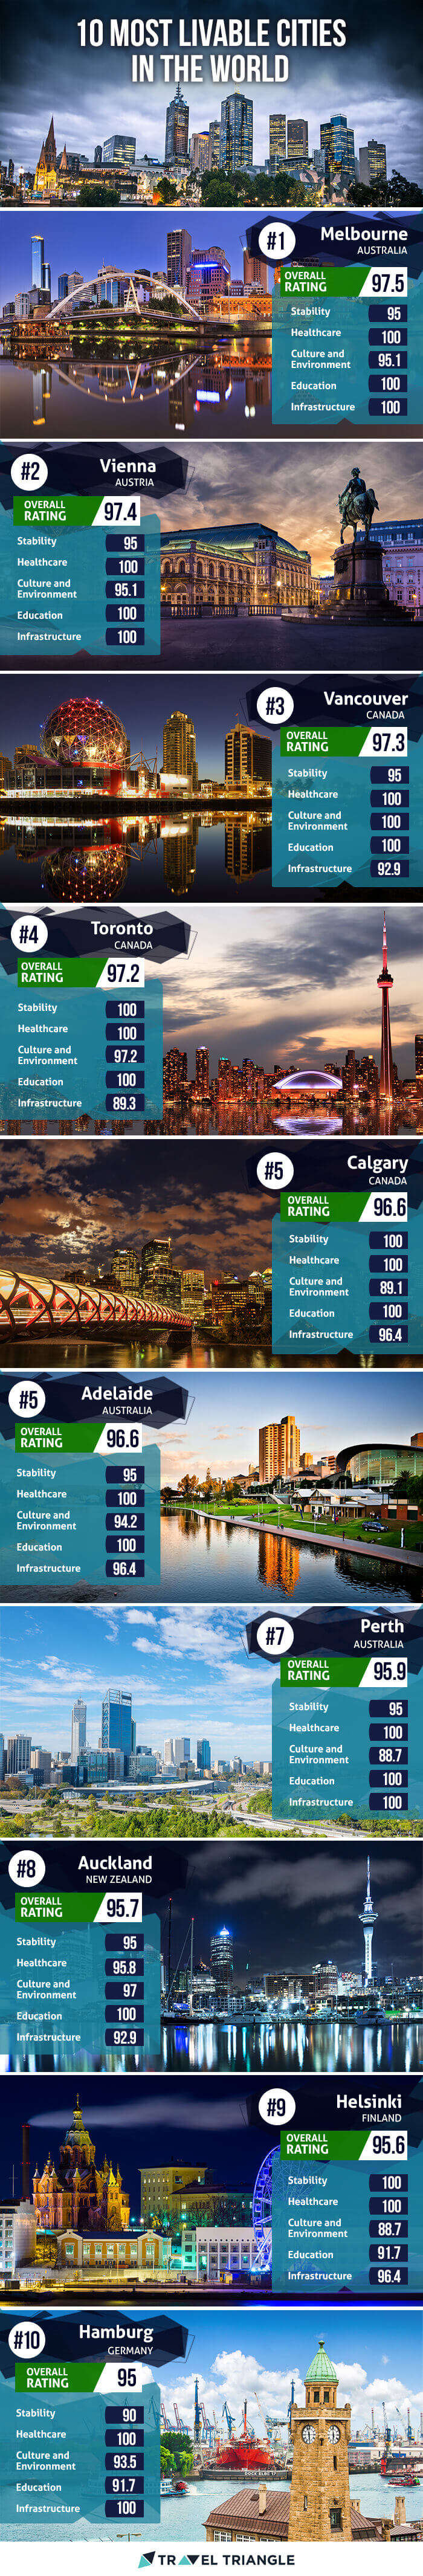 An infographic of the most livable cities in the world as listed by the Economist Intelligence Unit